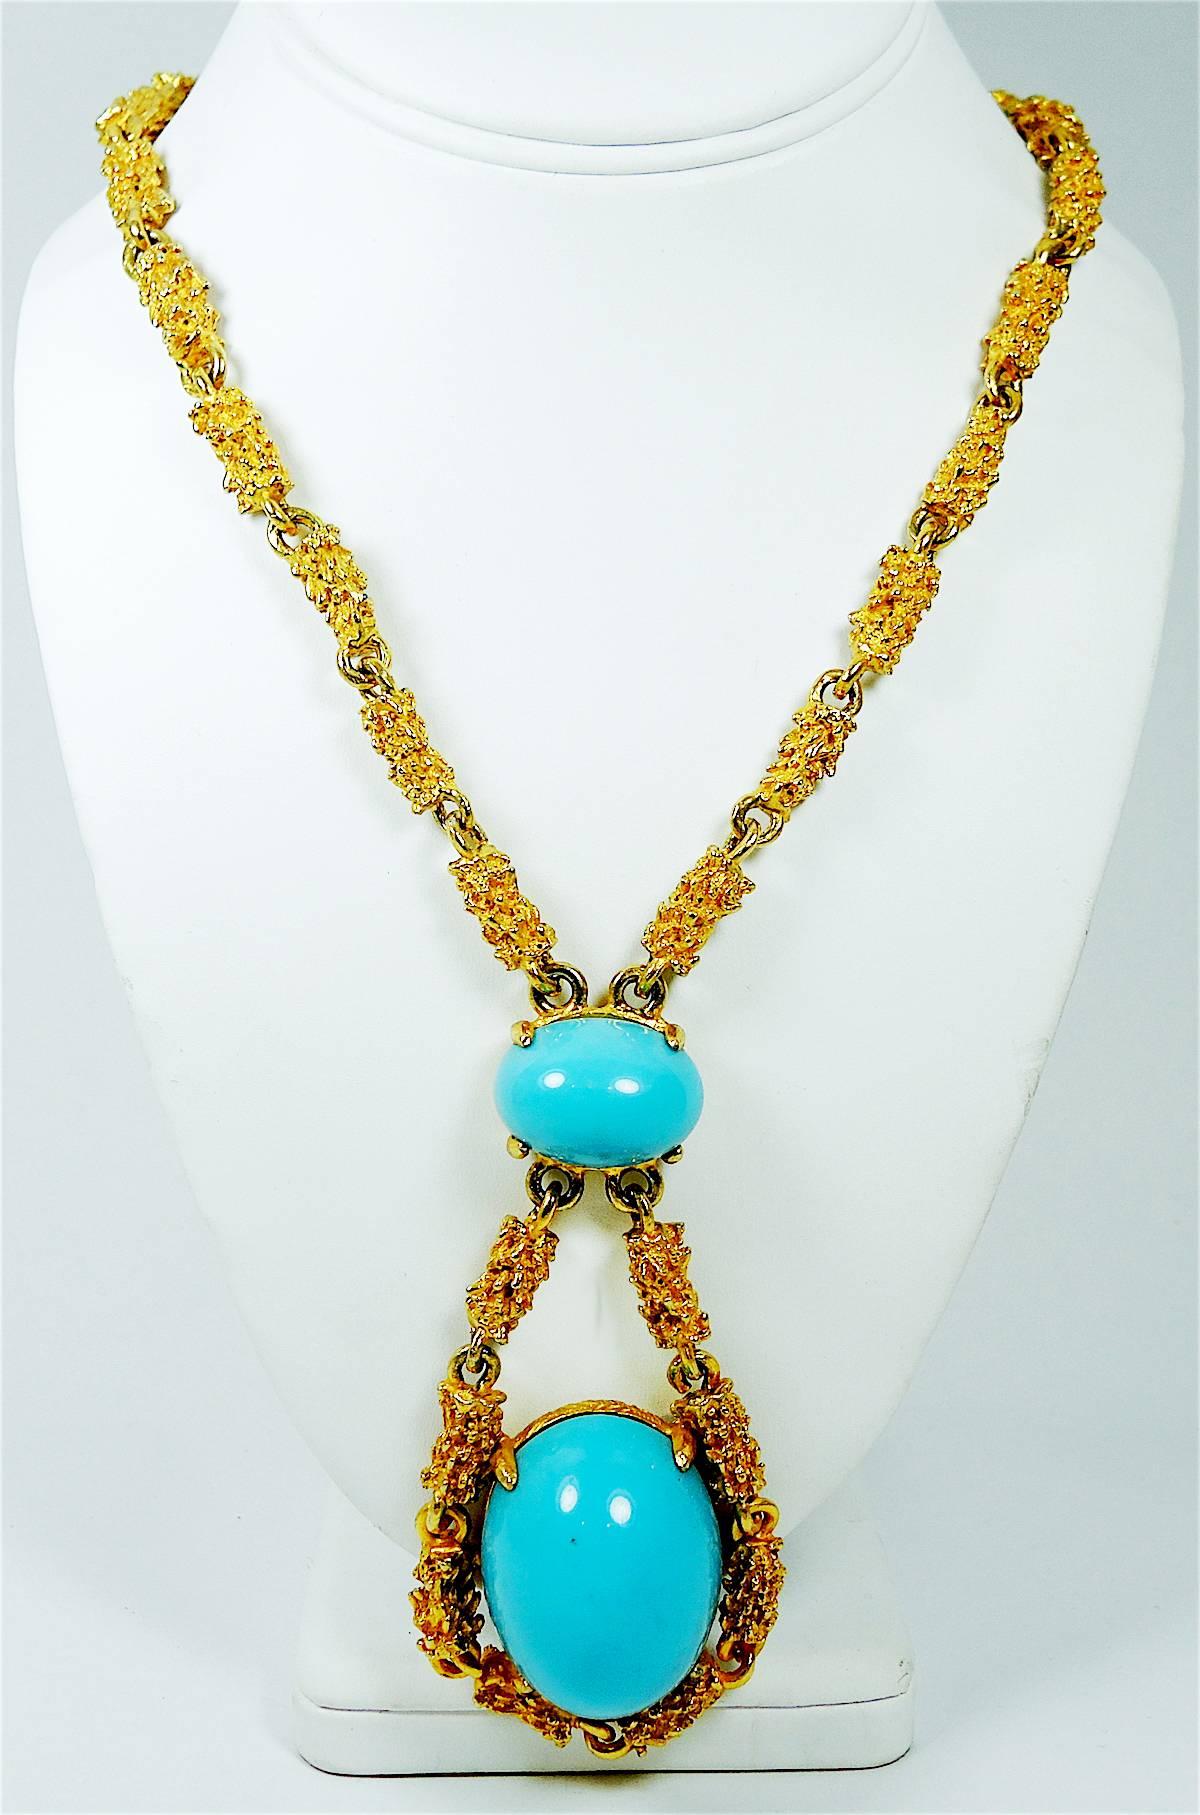 Alexis Kirk is known for bold designs like this beautiful faux turquoise cabochon drop that dangles from a heavily etched gold tone chain. The necklace measures, from top to bottom, 27” x 1/4” and the drop measures 4” x 2”. This necklace has a